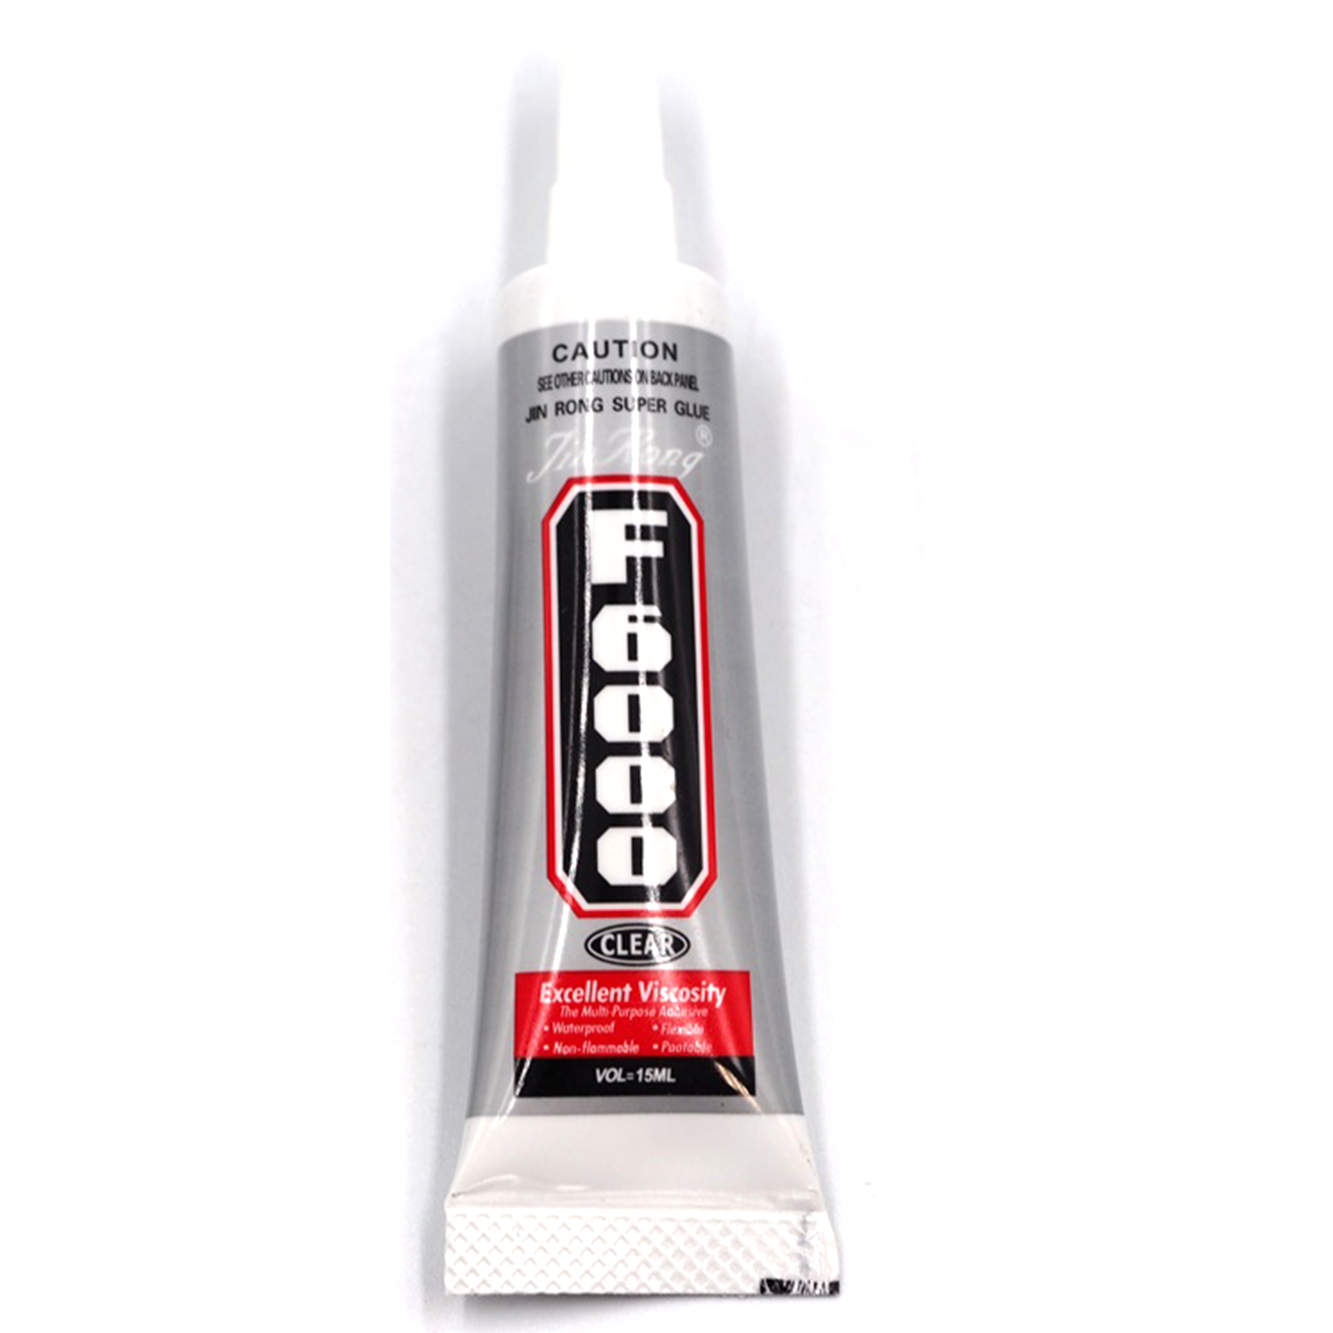 Adhesive, F6000, Excellent Viscosity Clear Super Glue, Jewelry & Craft, 15 ml - Butterfly Beads